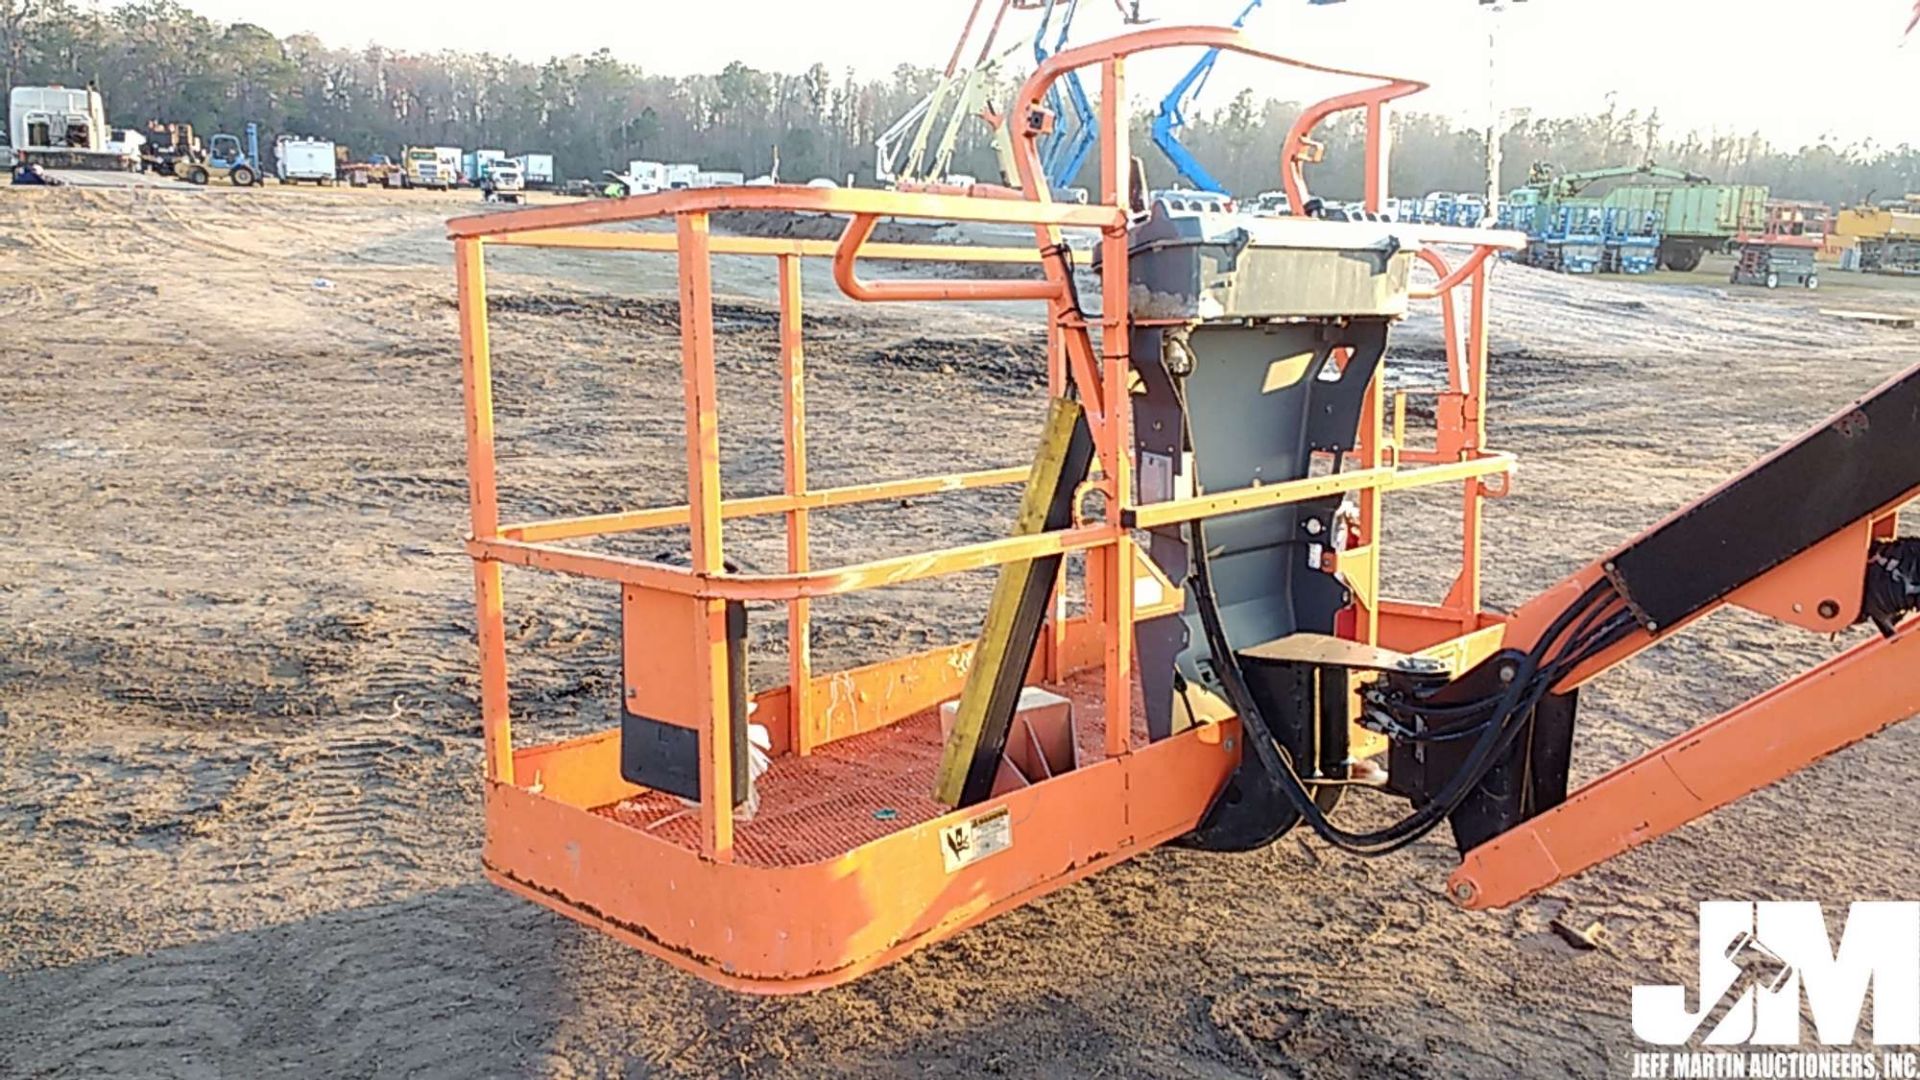 2013 JLG 600AJ 60' 4X4 ARTICULATED BOOM LIFT SN: 0300165579 - Image 11 of 27